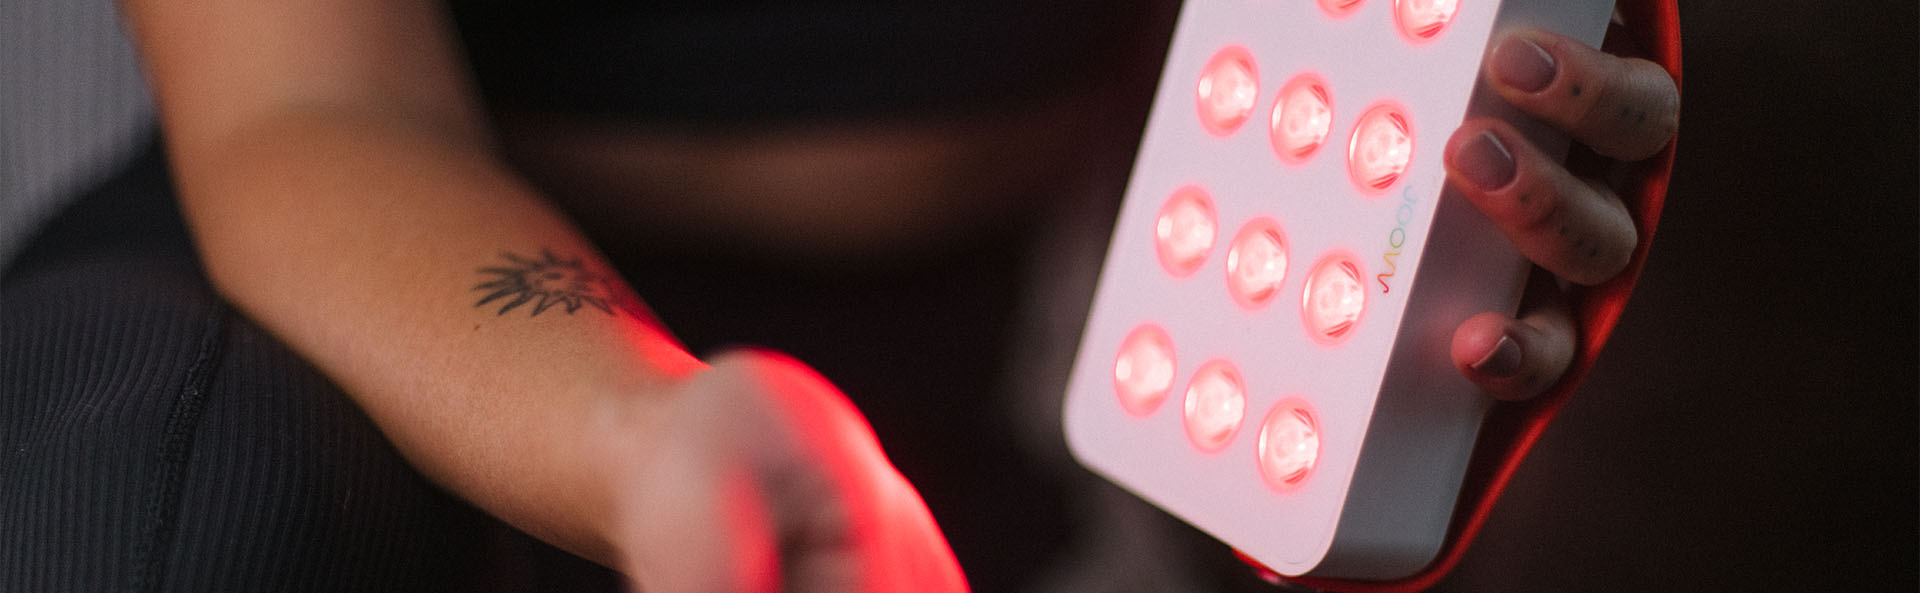 The Truth About Power and Misleading Red Light Therapy Claims